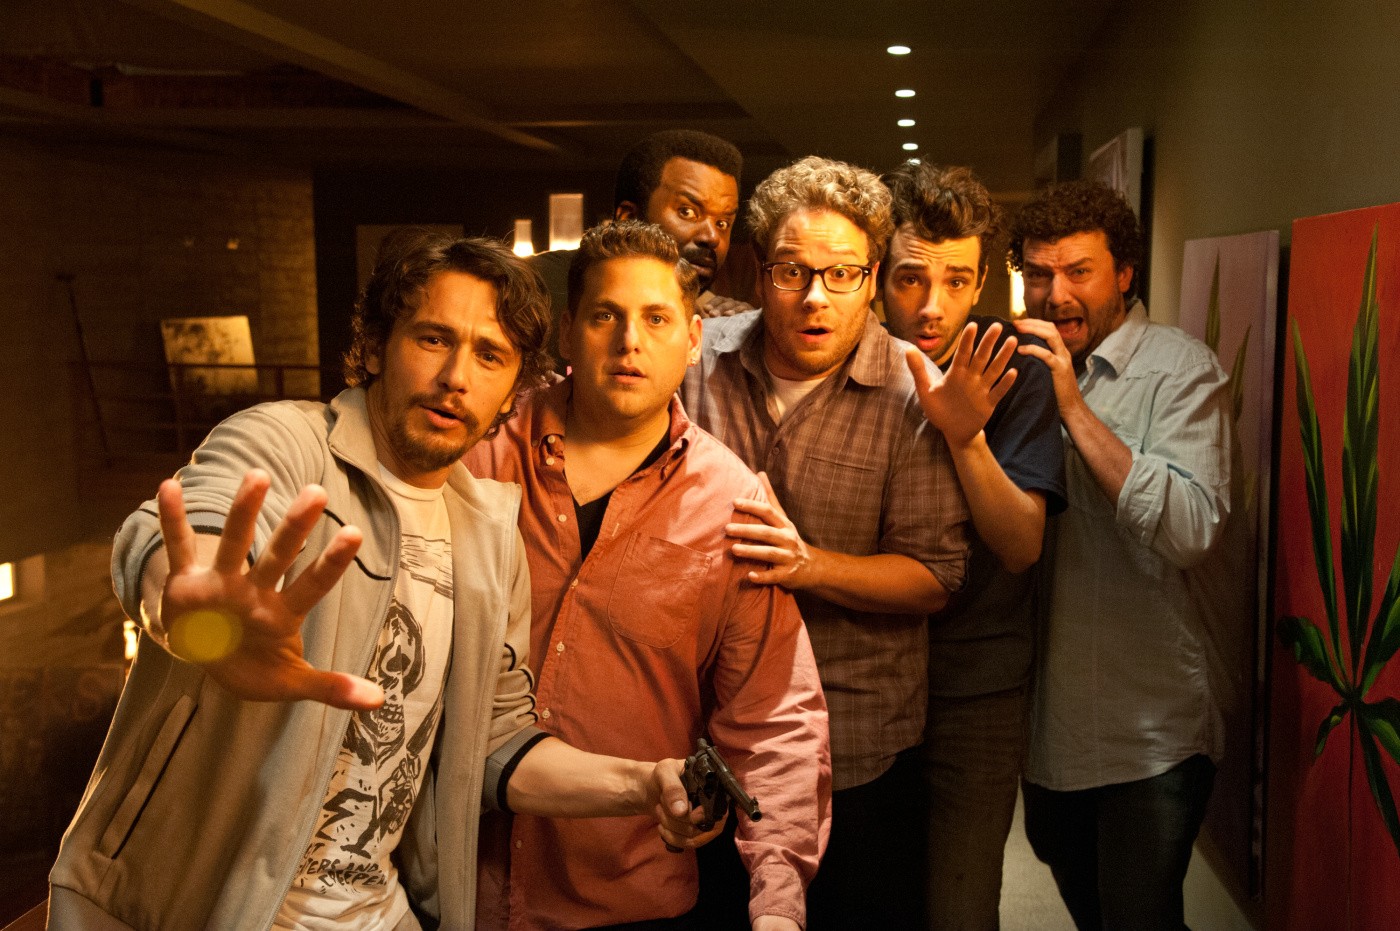 James Franco, Jonah Hill, Craig Robinson, Seth Rogen, Jay Baruchel and Danny McBride in Columbia Pictures' This Is the End (2013)